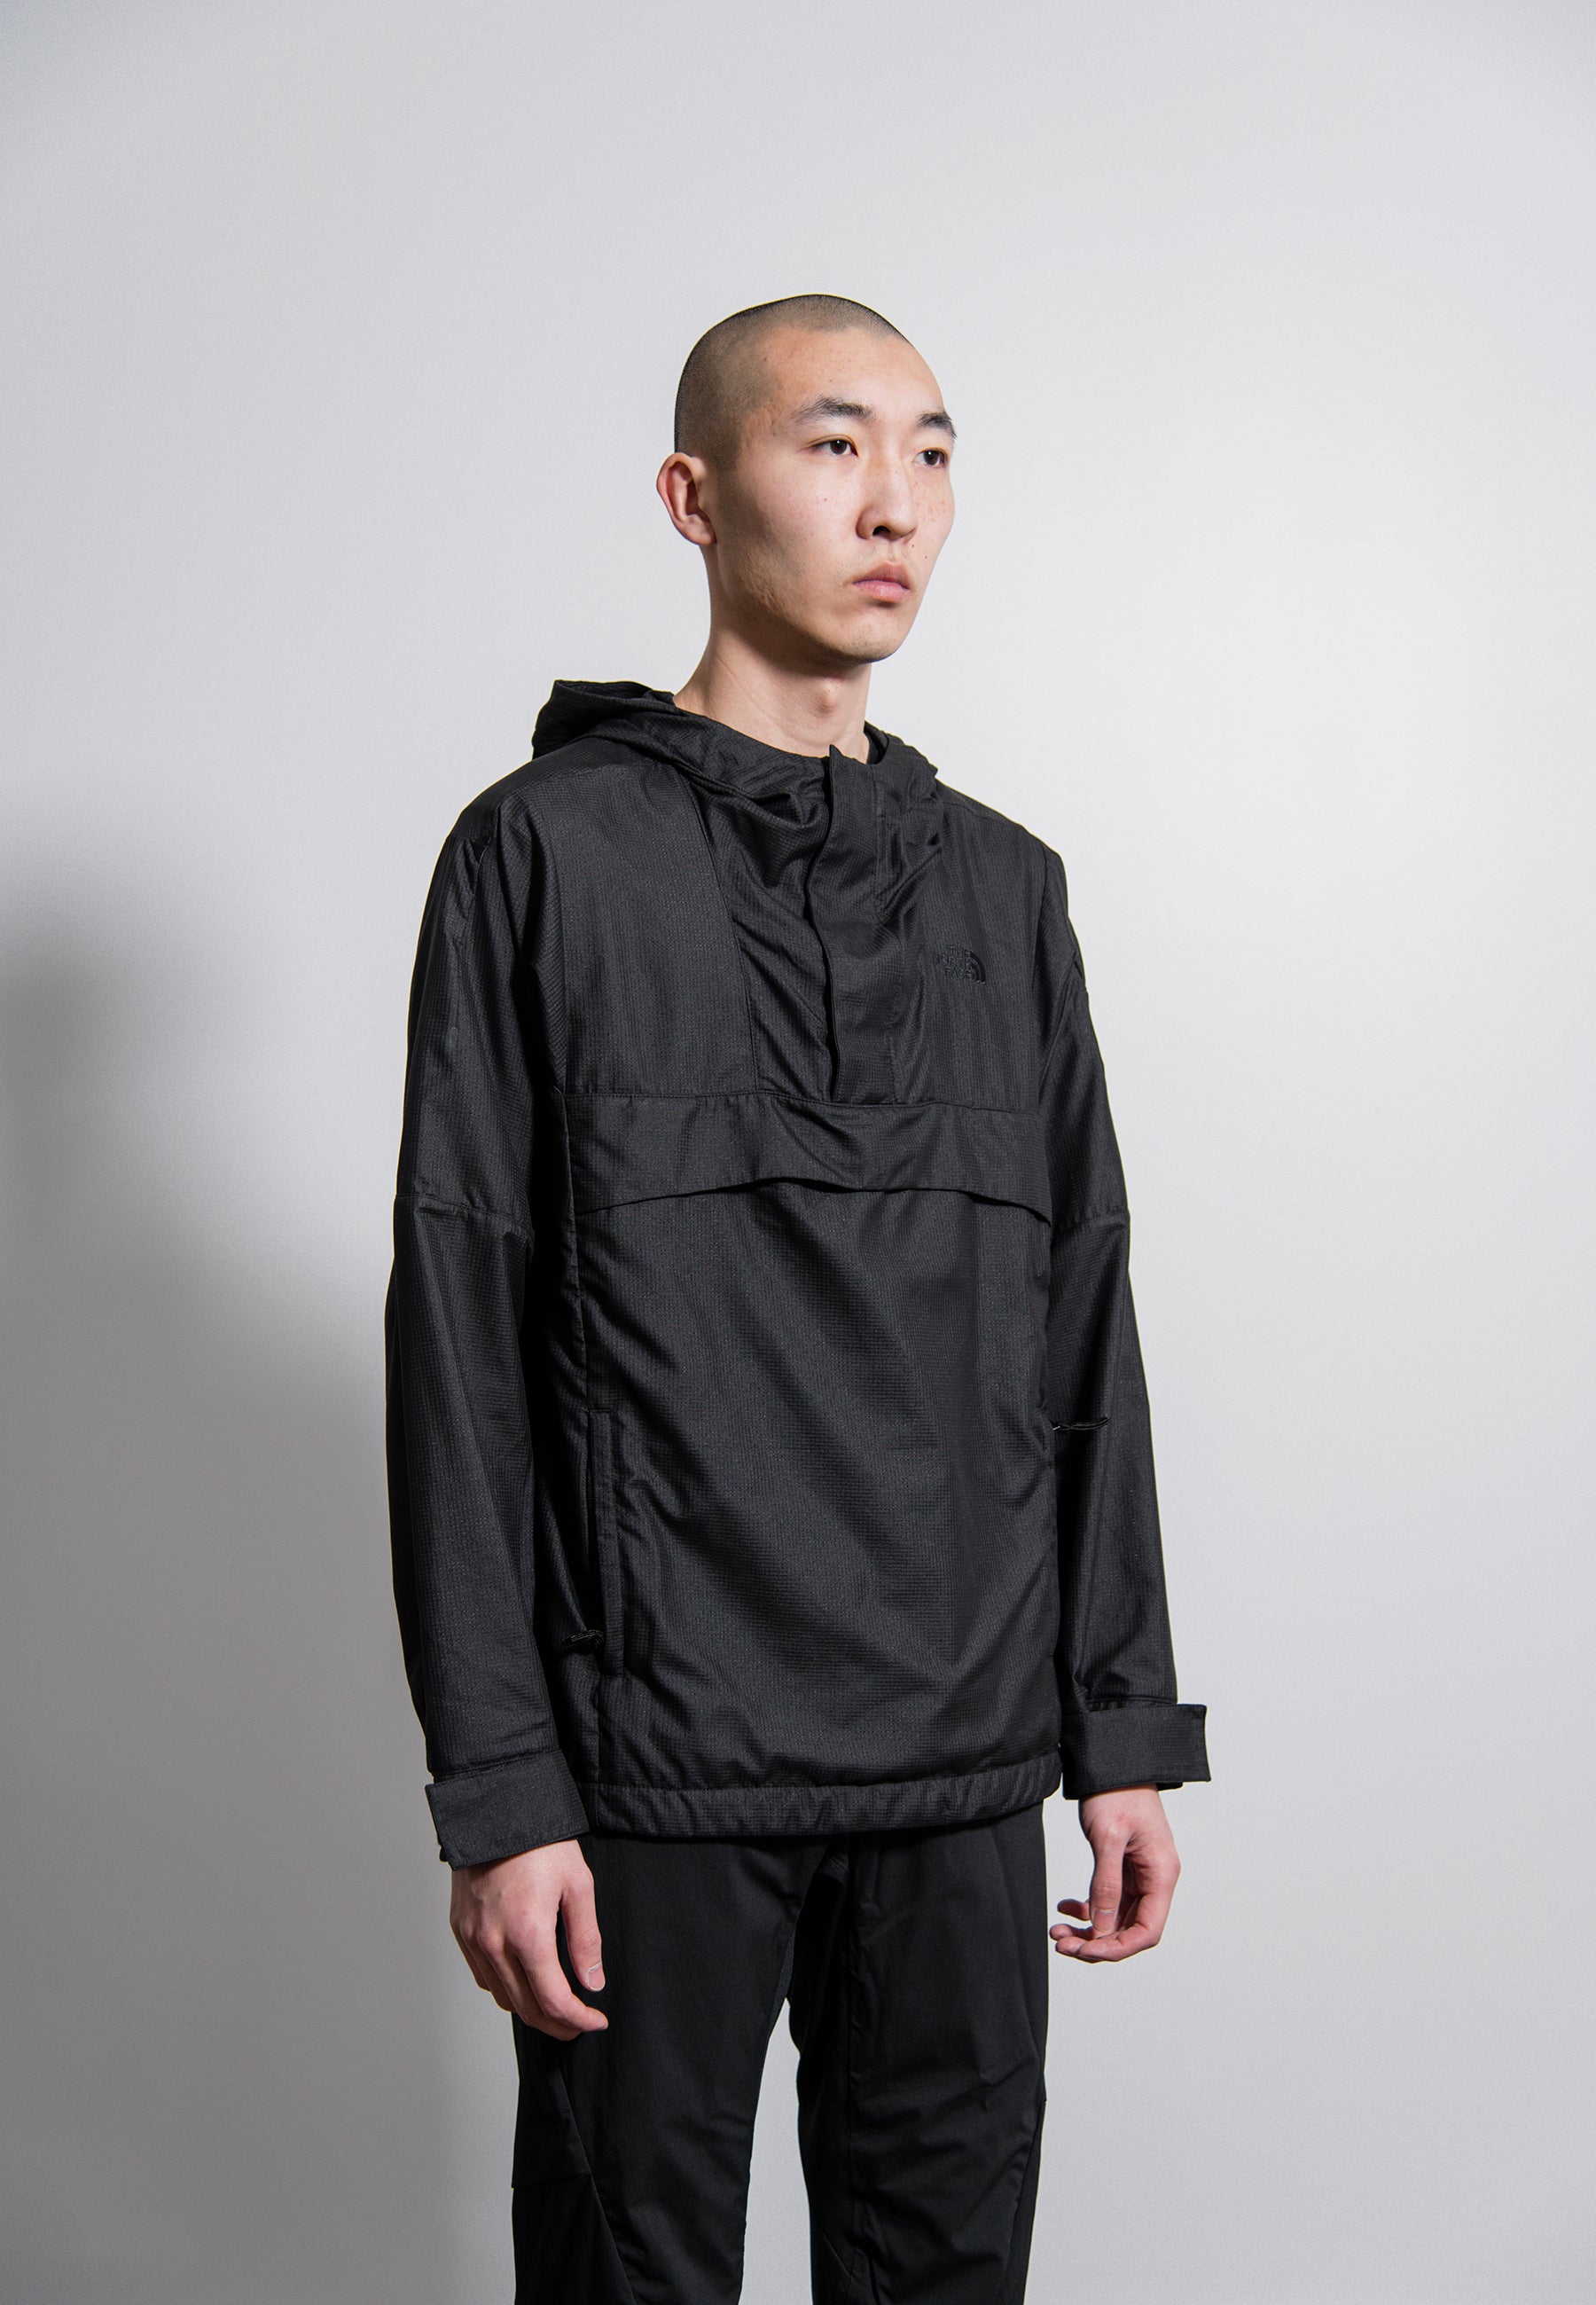 north face pullover coat